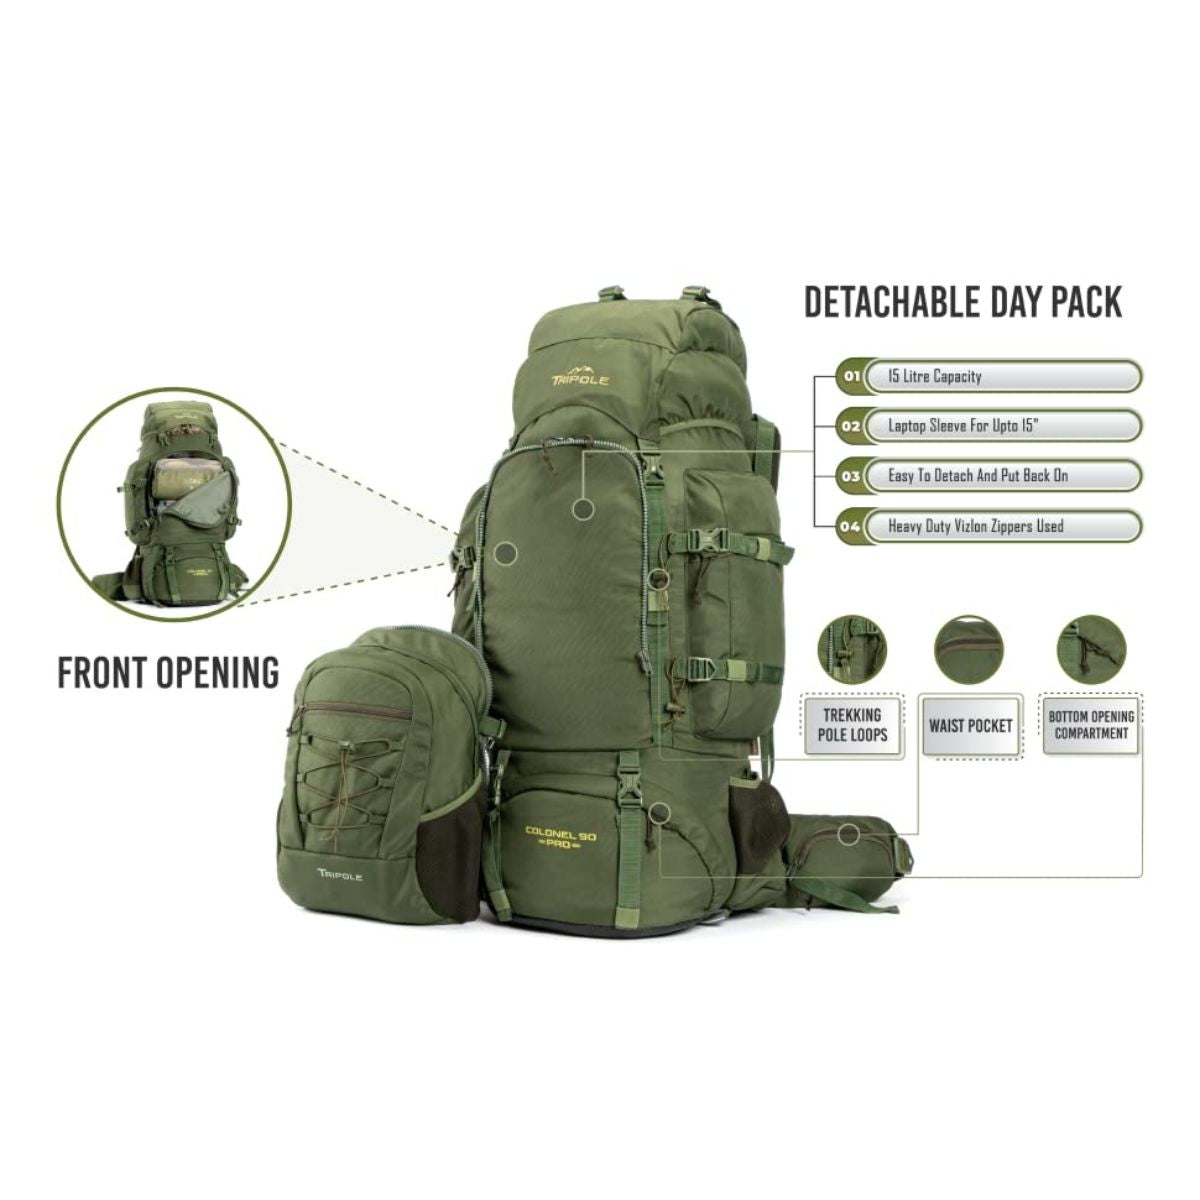 Colonel Pro Metal Frame Rucksack + Detachable Bag & Rain Cover - 105 Litres - Army Green 10